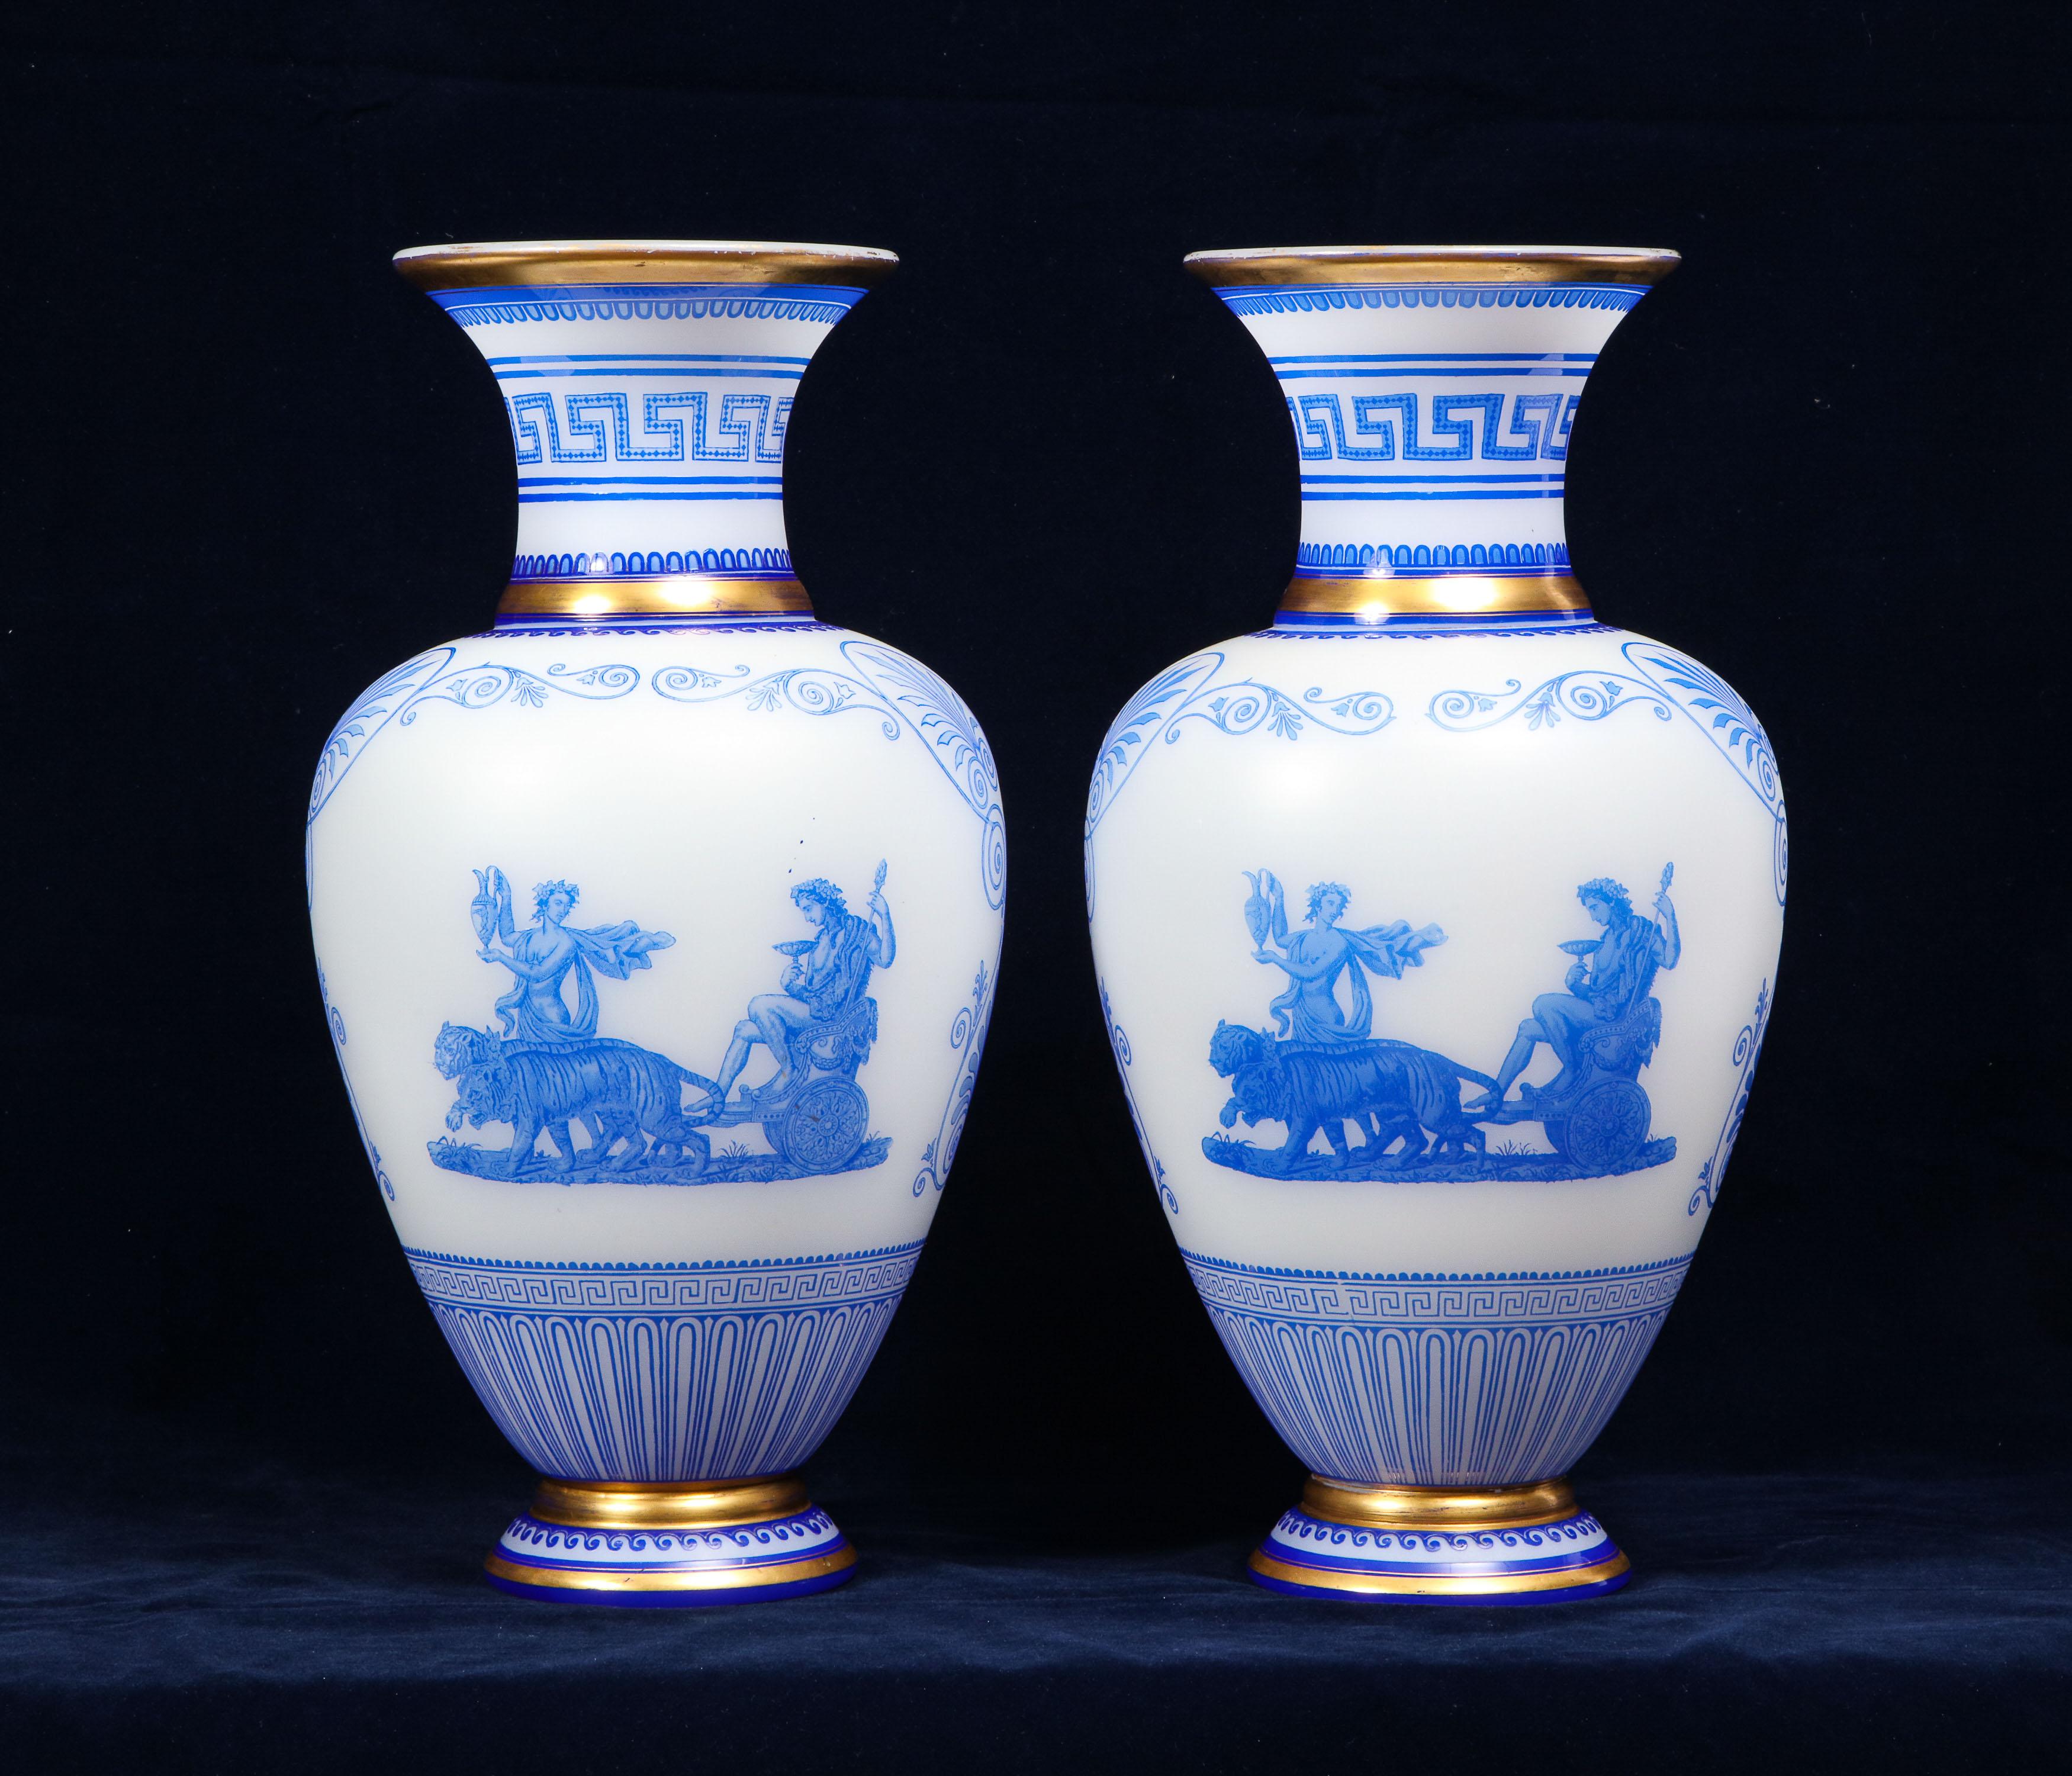 A fabulous & rare pair of baccarat acid-cameo double overlay blue-cased white opaline glass vases circa 1860-1870. Each vase decorated on the front and reverse with Bacchus or Ariadne in a chariot surrounded by scrolling foliage and anthemion